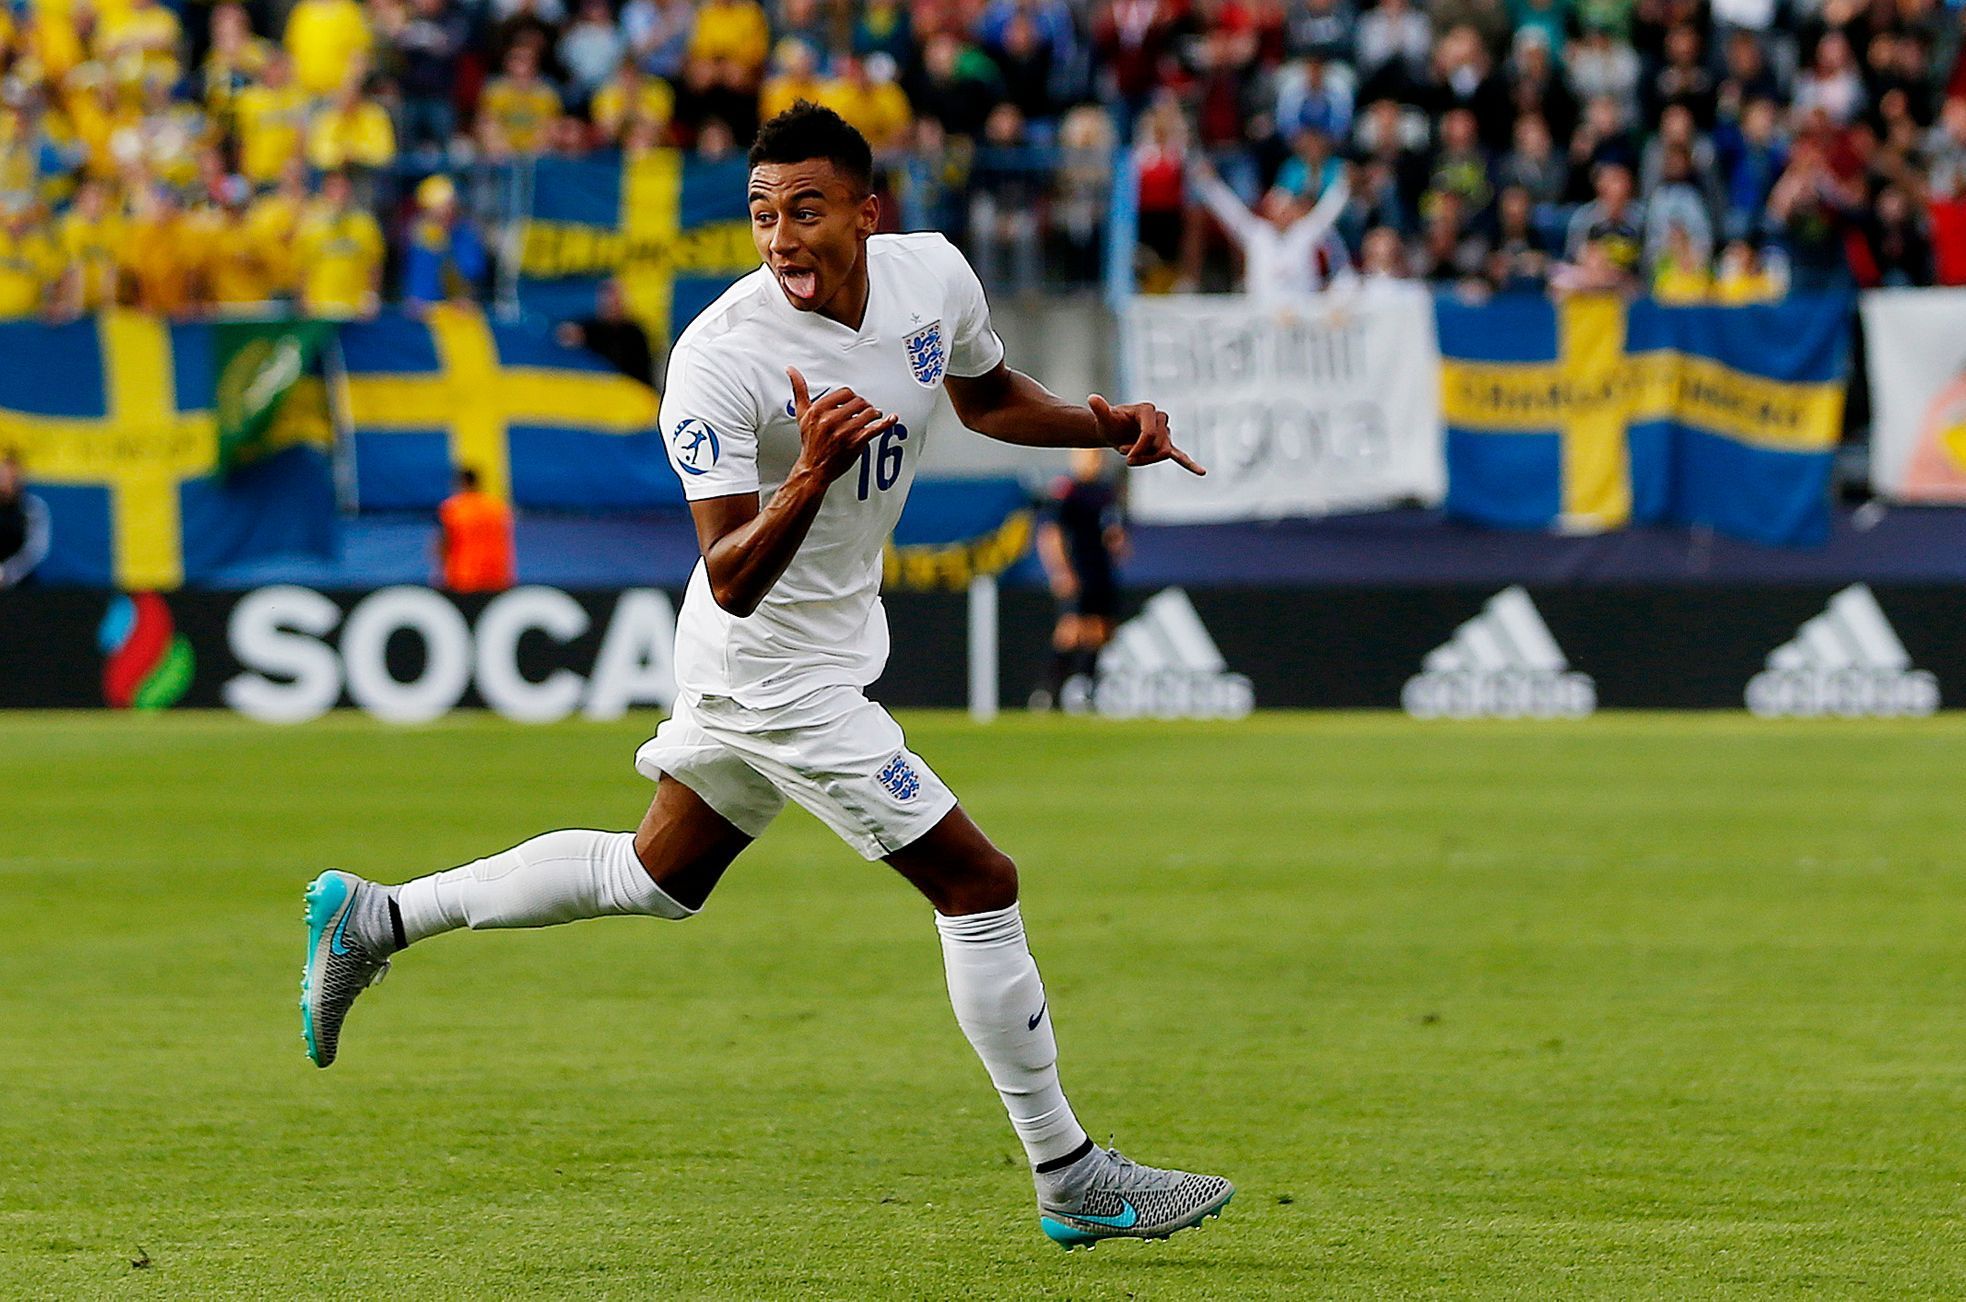 SOC: Jesse Lingard celebrates after scoring the first goal for England